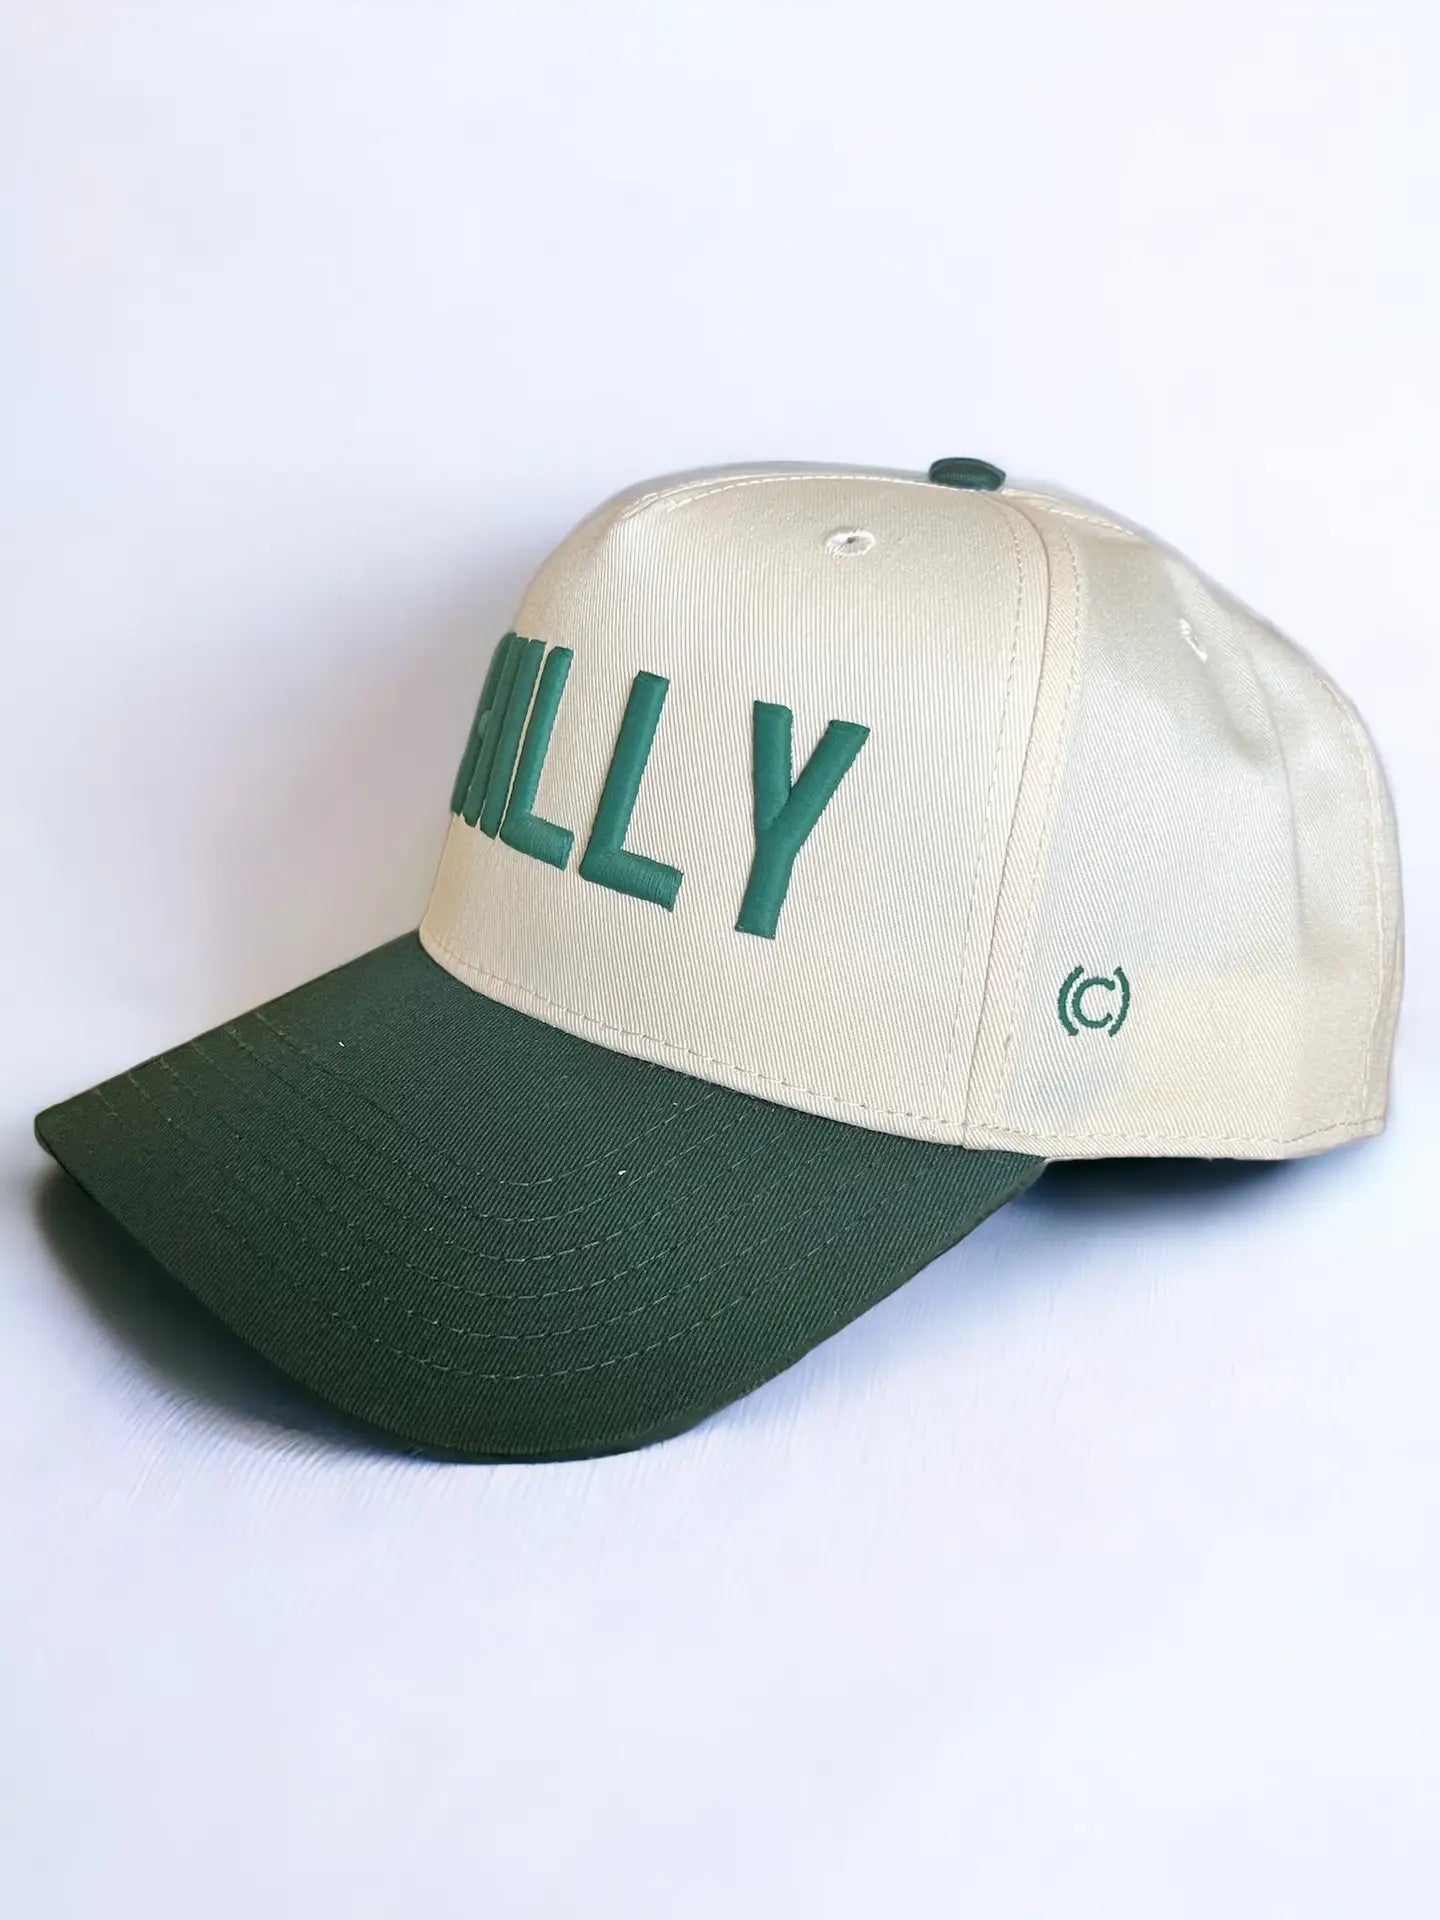 Philly Vintage Two-Tone Cream & Green Snapback